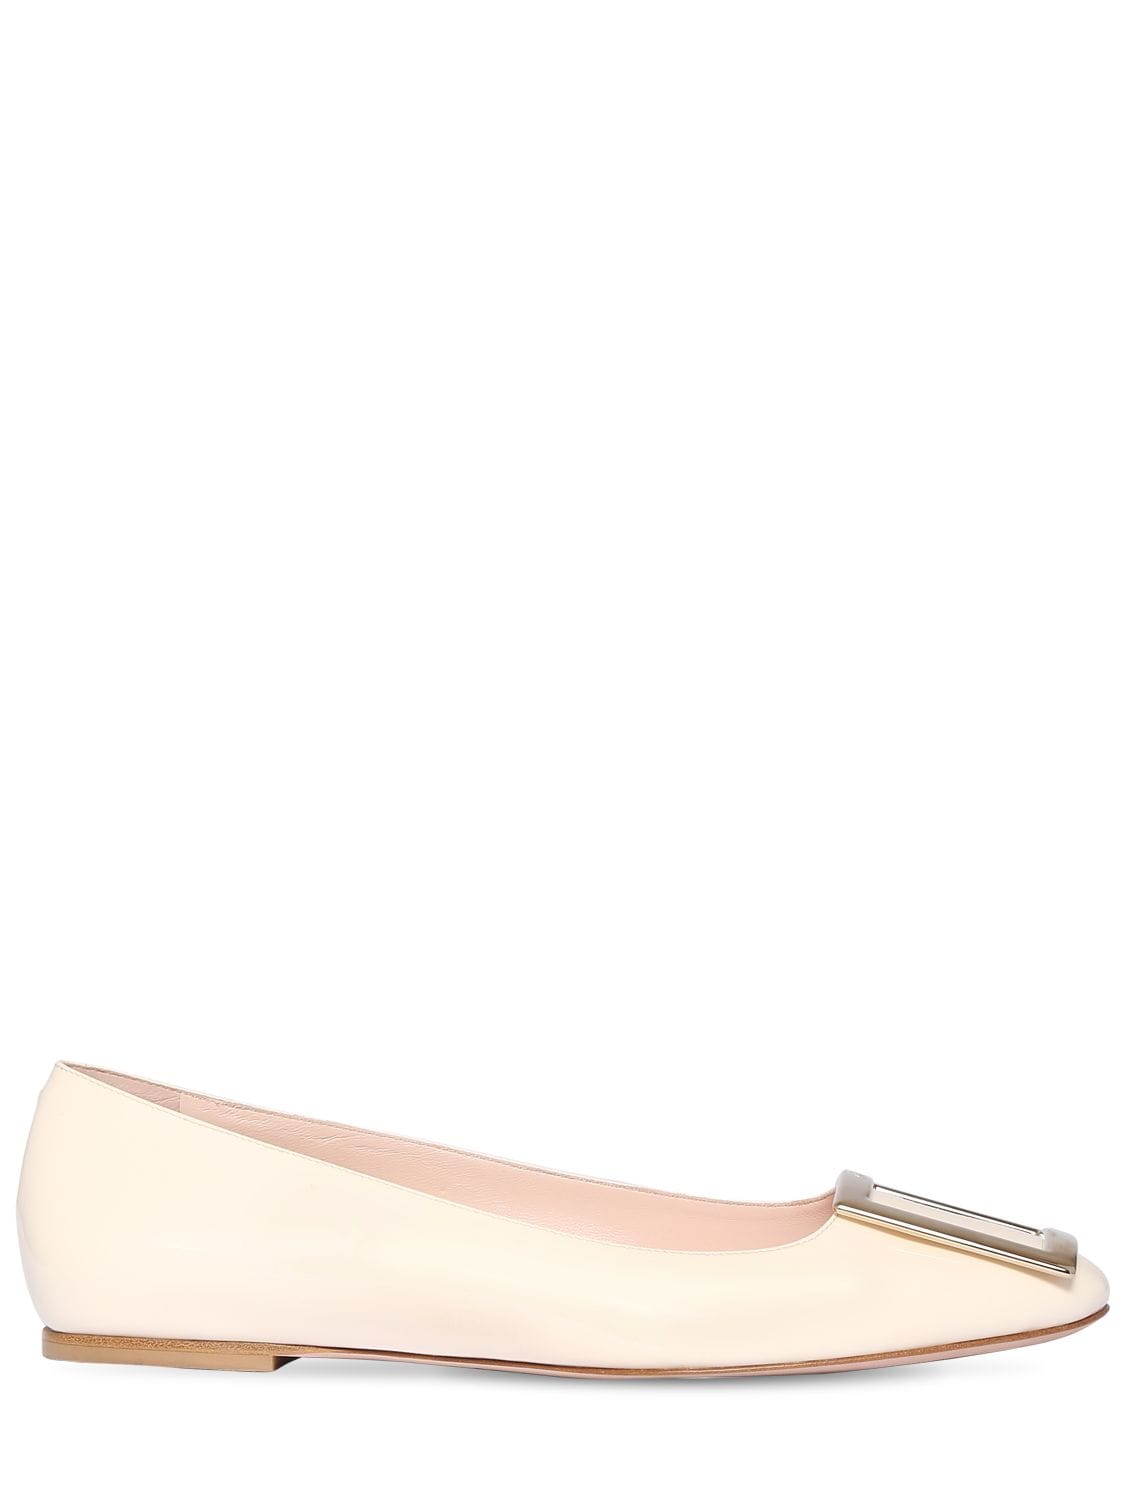 Roger Vivier 10mm Tres Vivier Patent Leather Flats In Off White